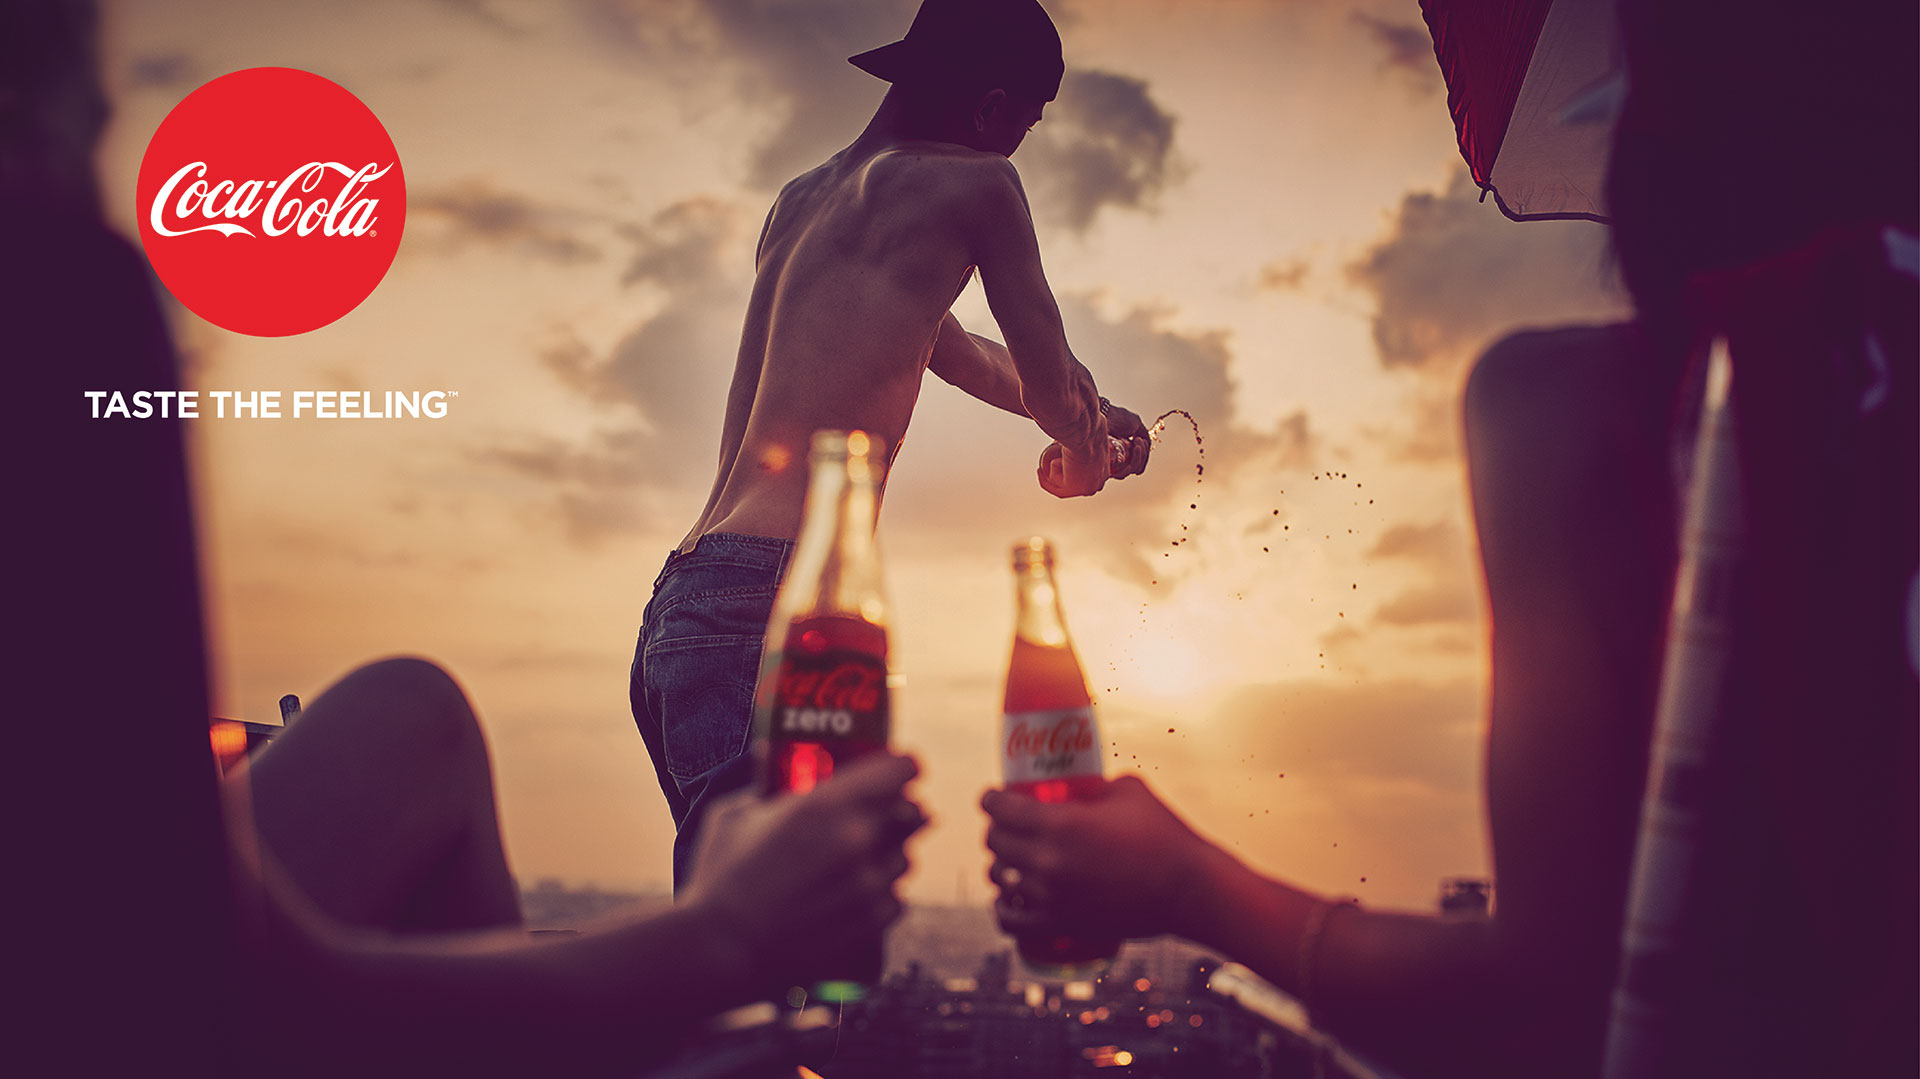 Here Are 25 Sweet, Simple Ads From Coca-Cola's Big New 'Taste the Feeling' Campaign